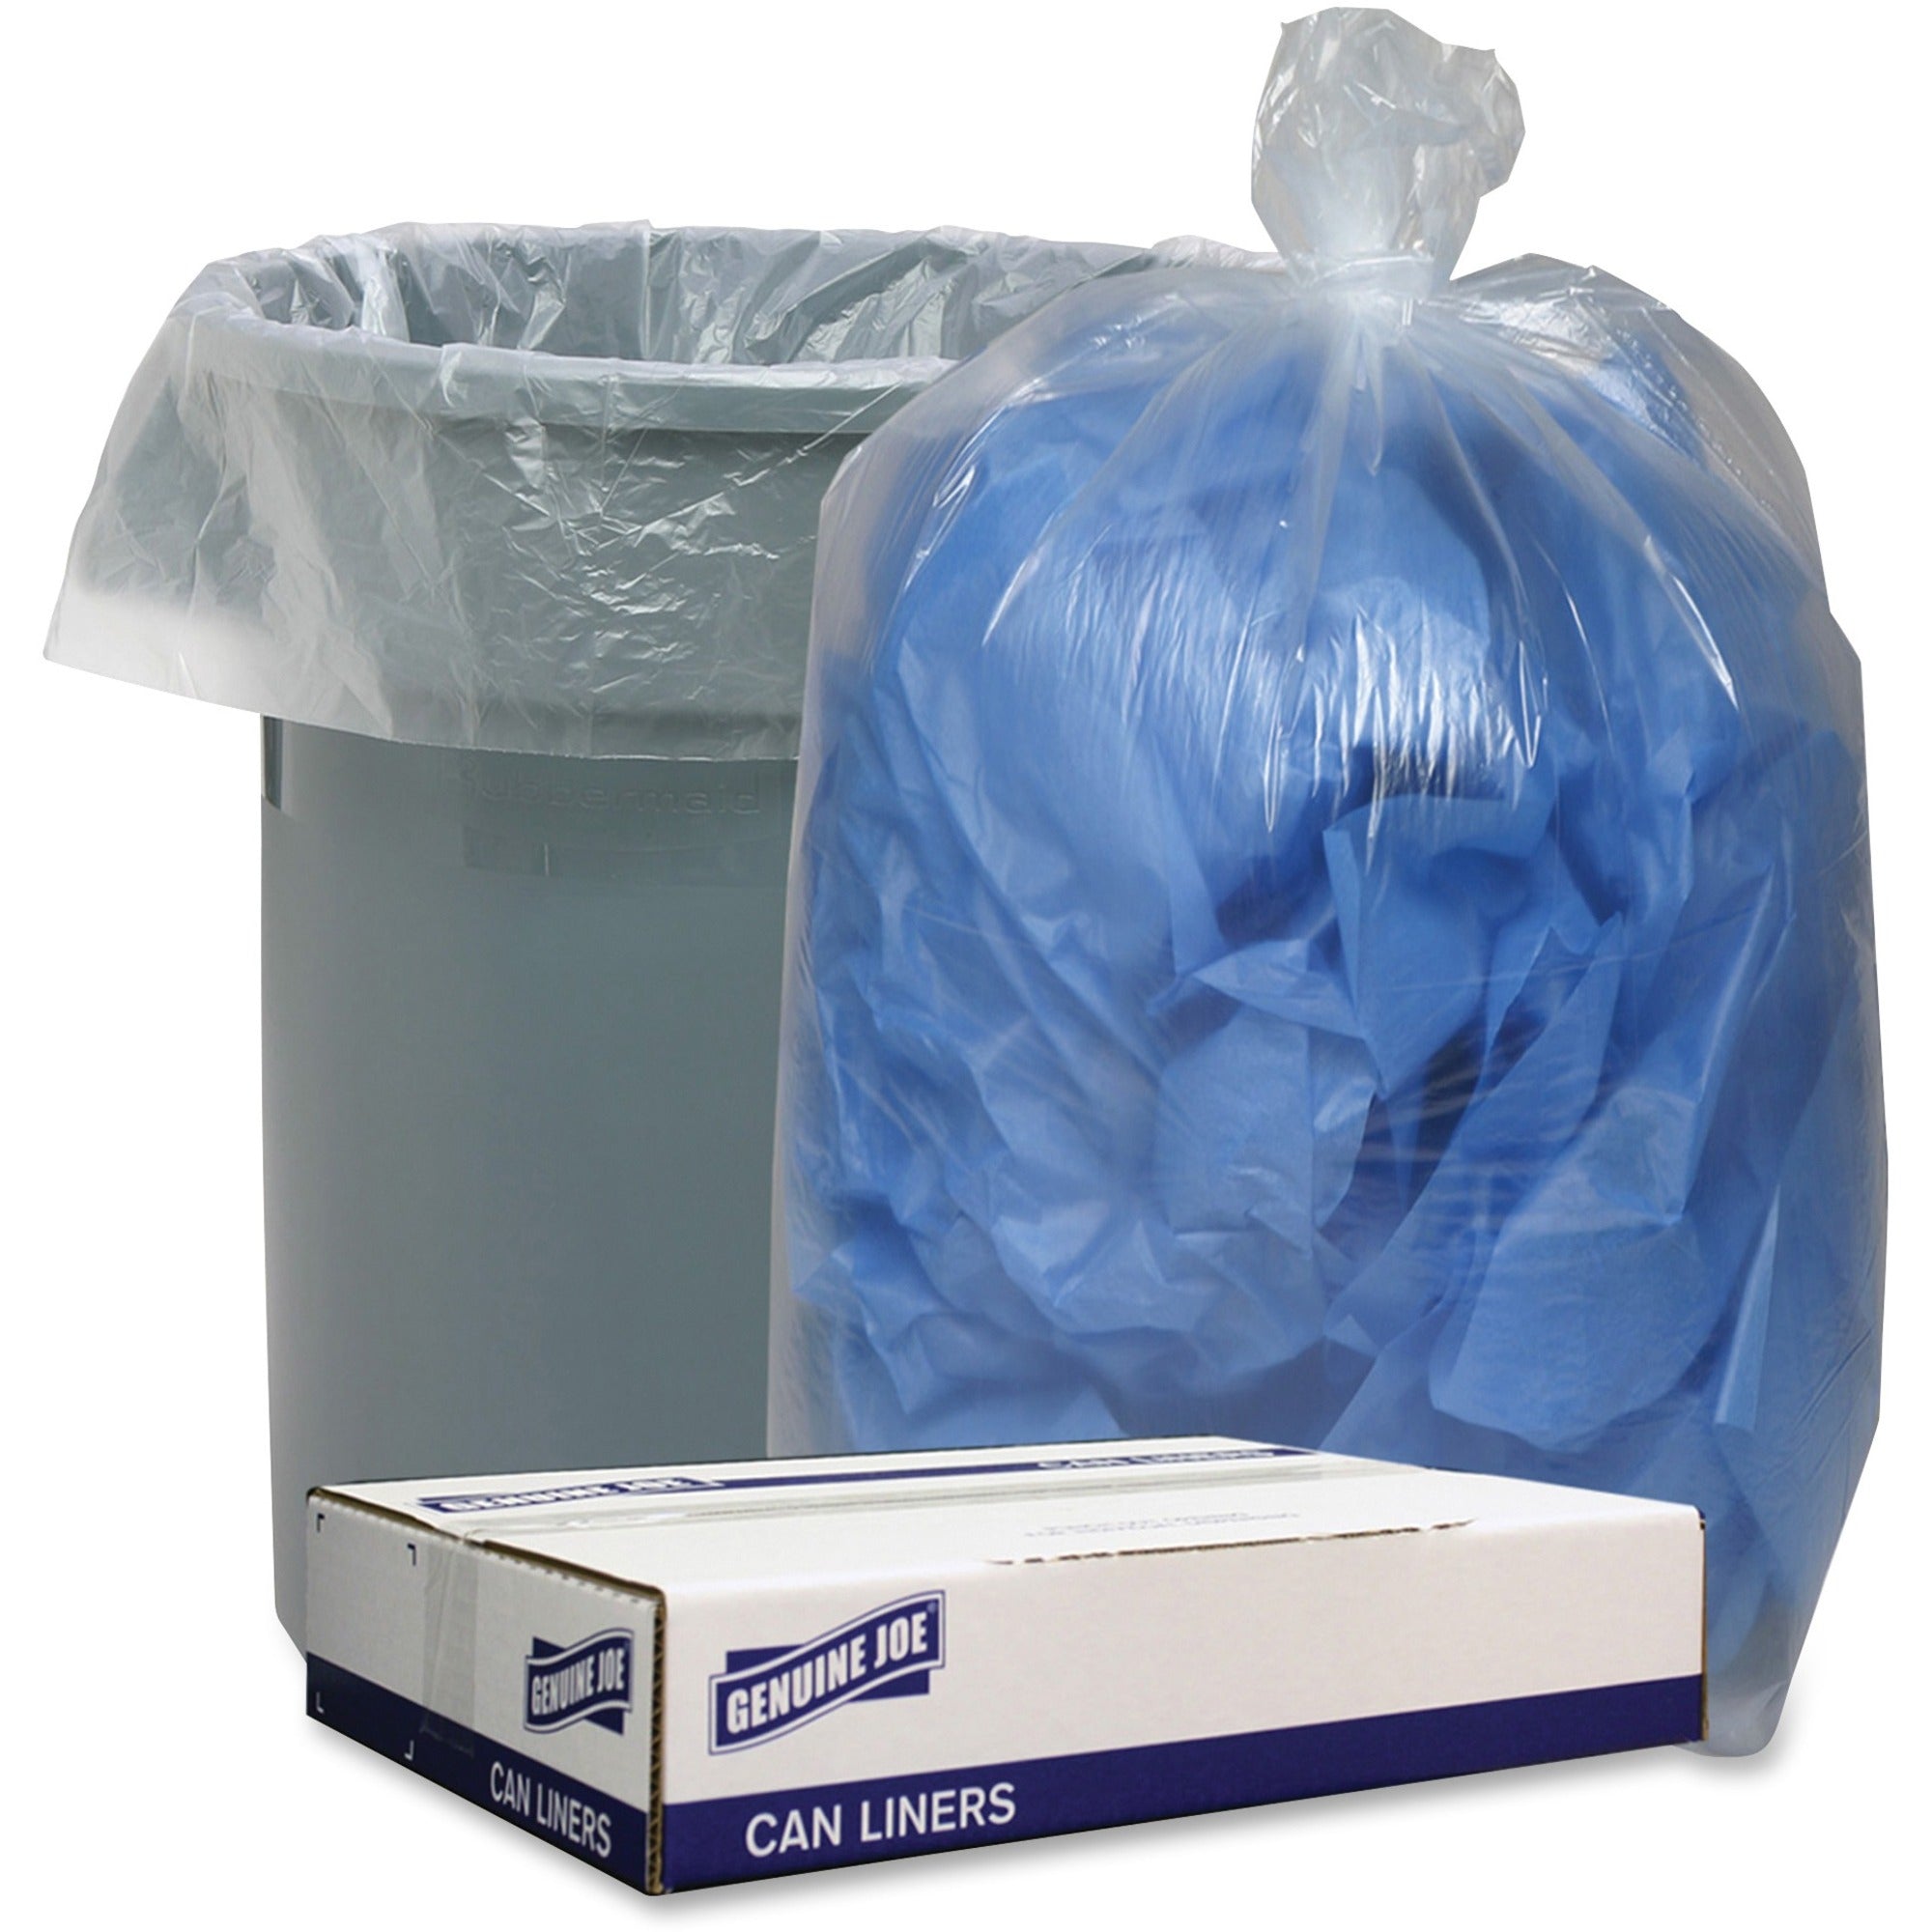 genuine-joe-clear-low-density-can-liners-45-gal-capacity-40-width-x-46-length-110-mil-28-micron-thickness-low-density-clear-100-carton-recycled_gjo29126 - 1